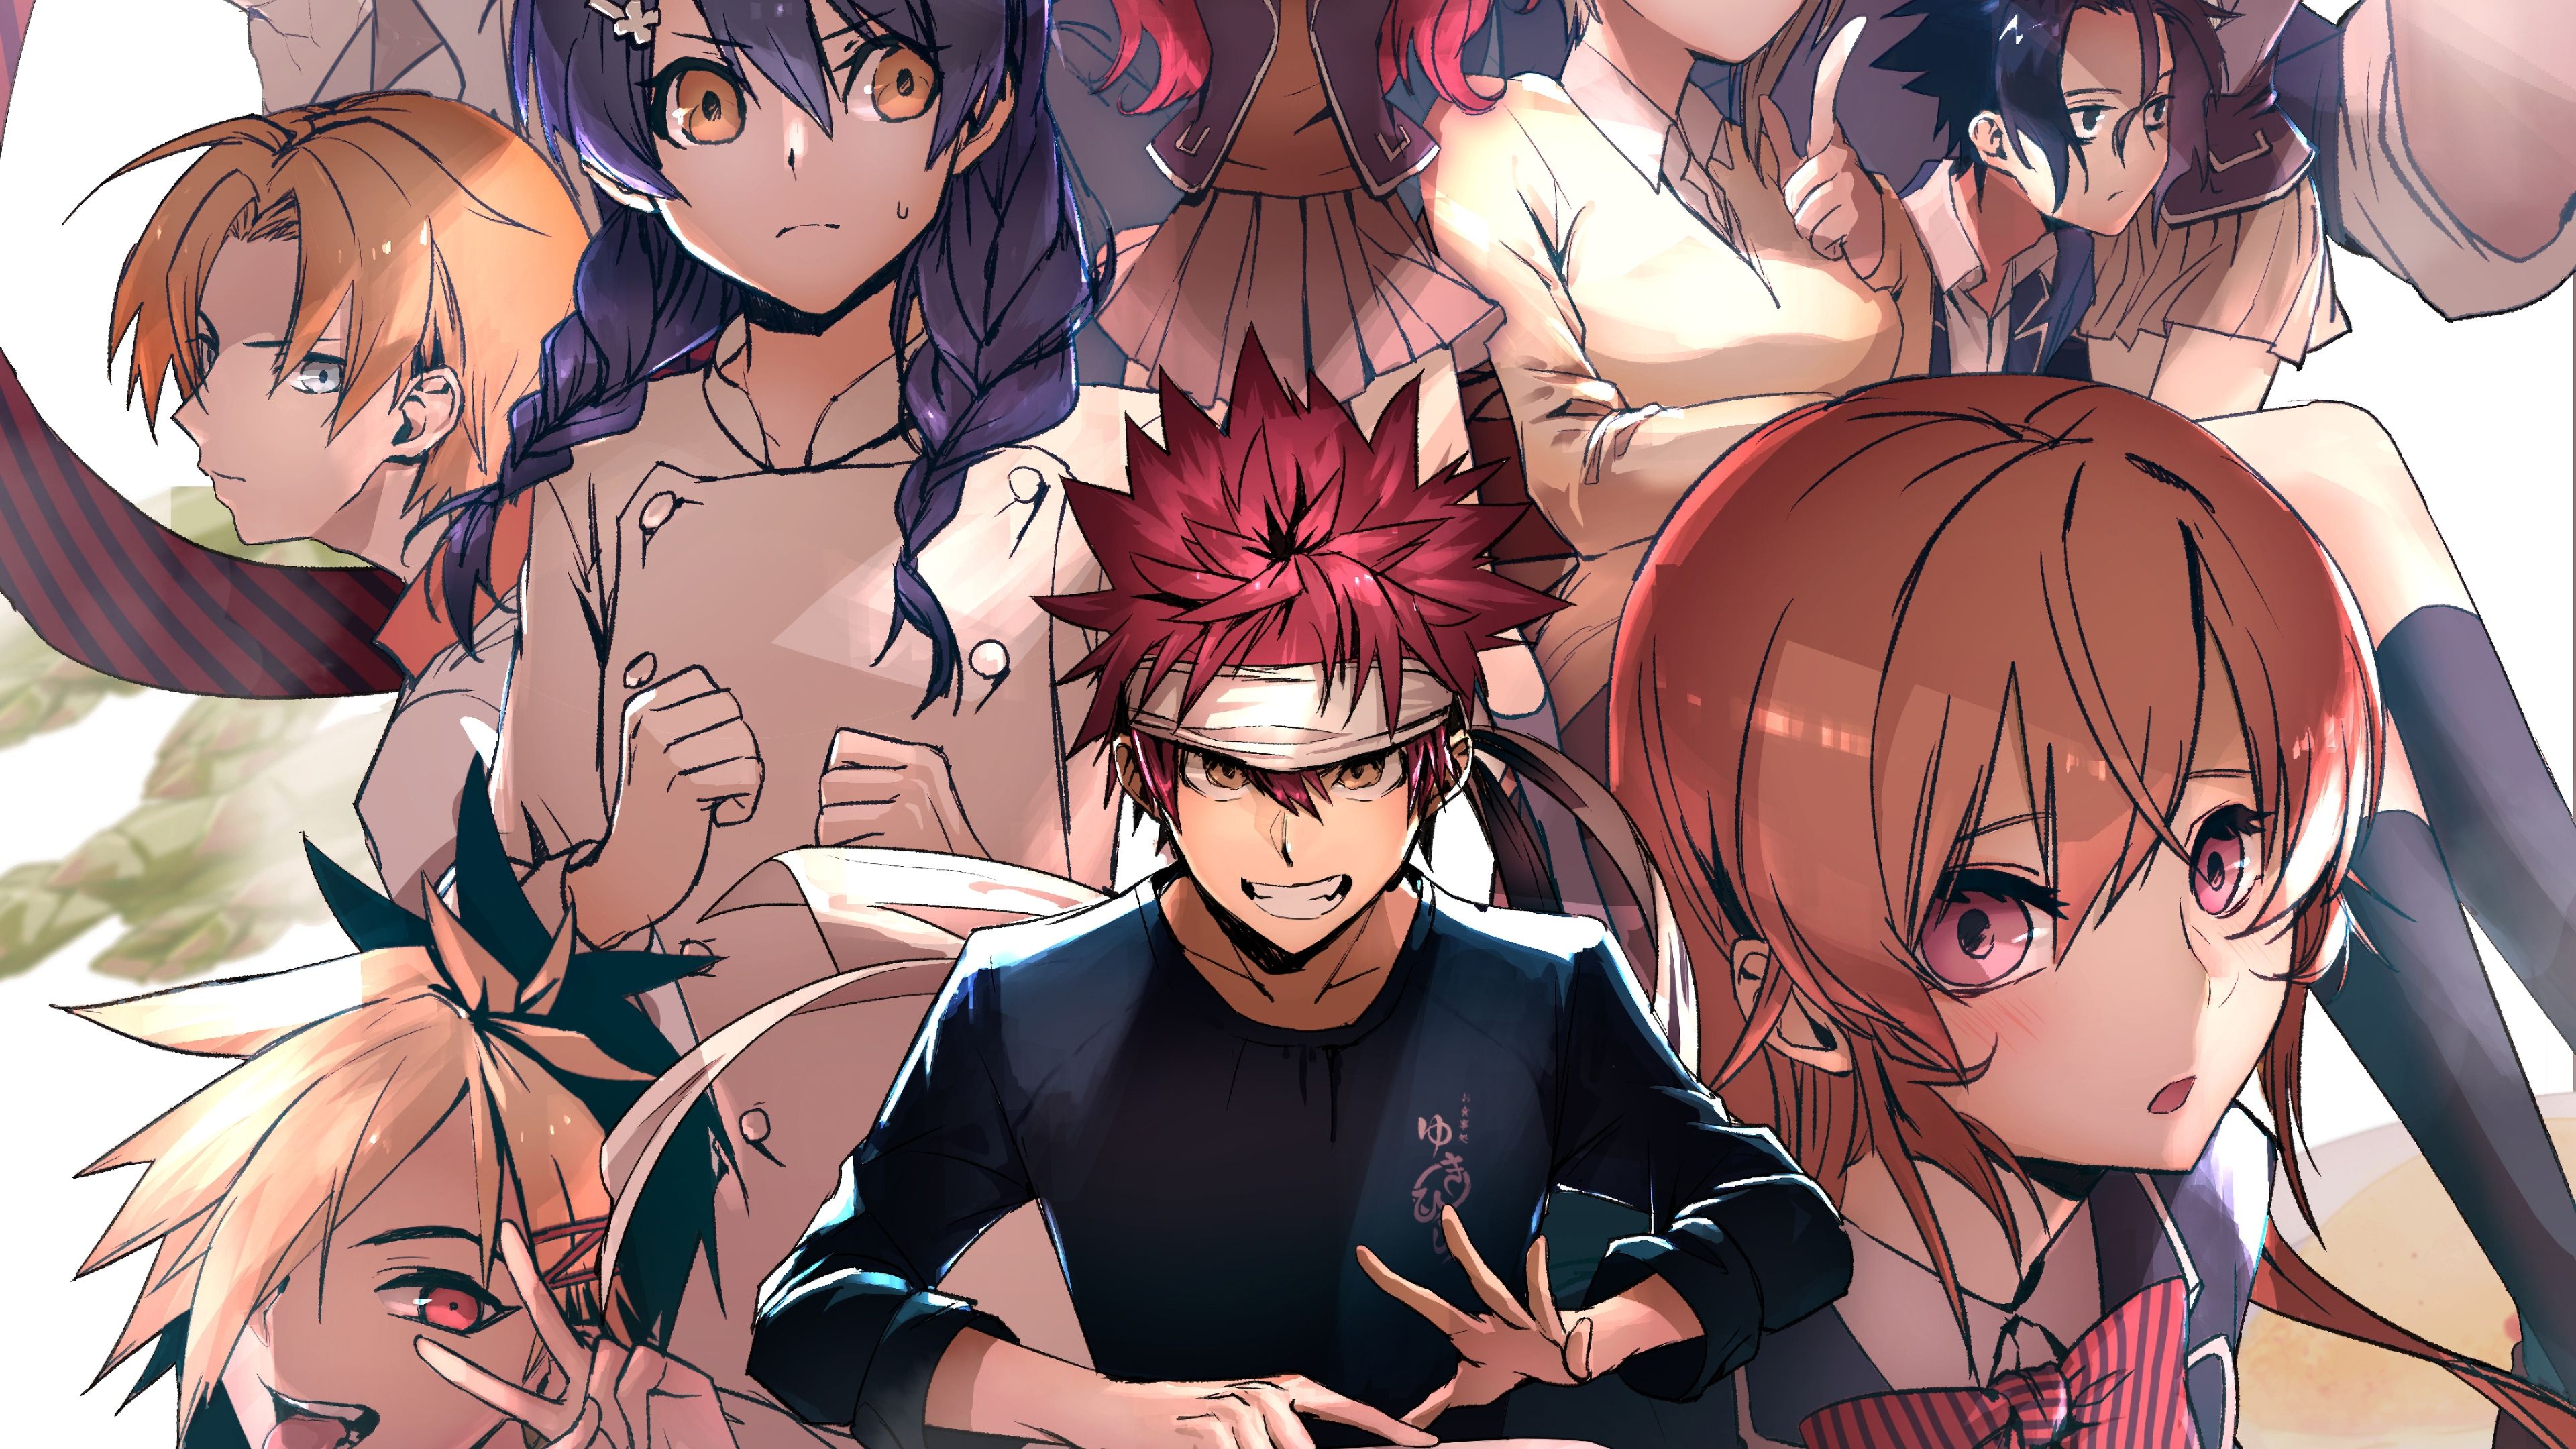 Food Wars Anime Hd Wallpapers Wallpaper Cave